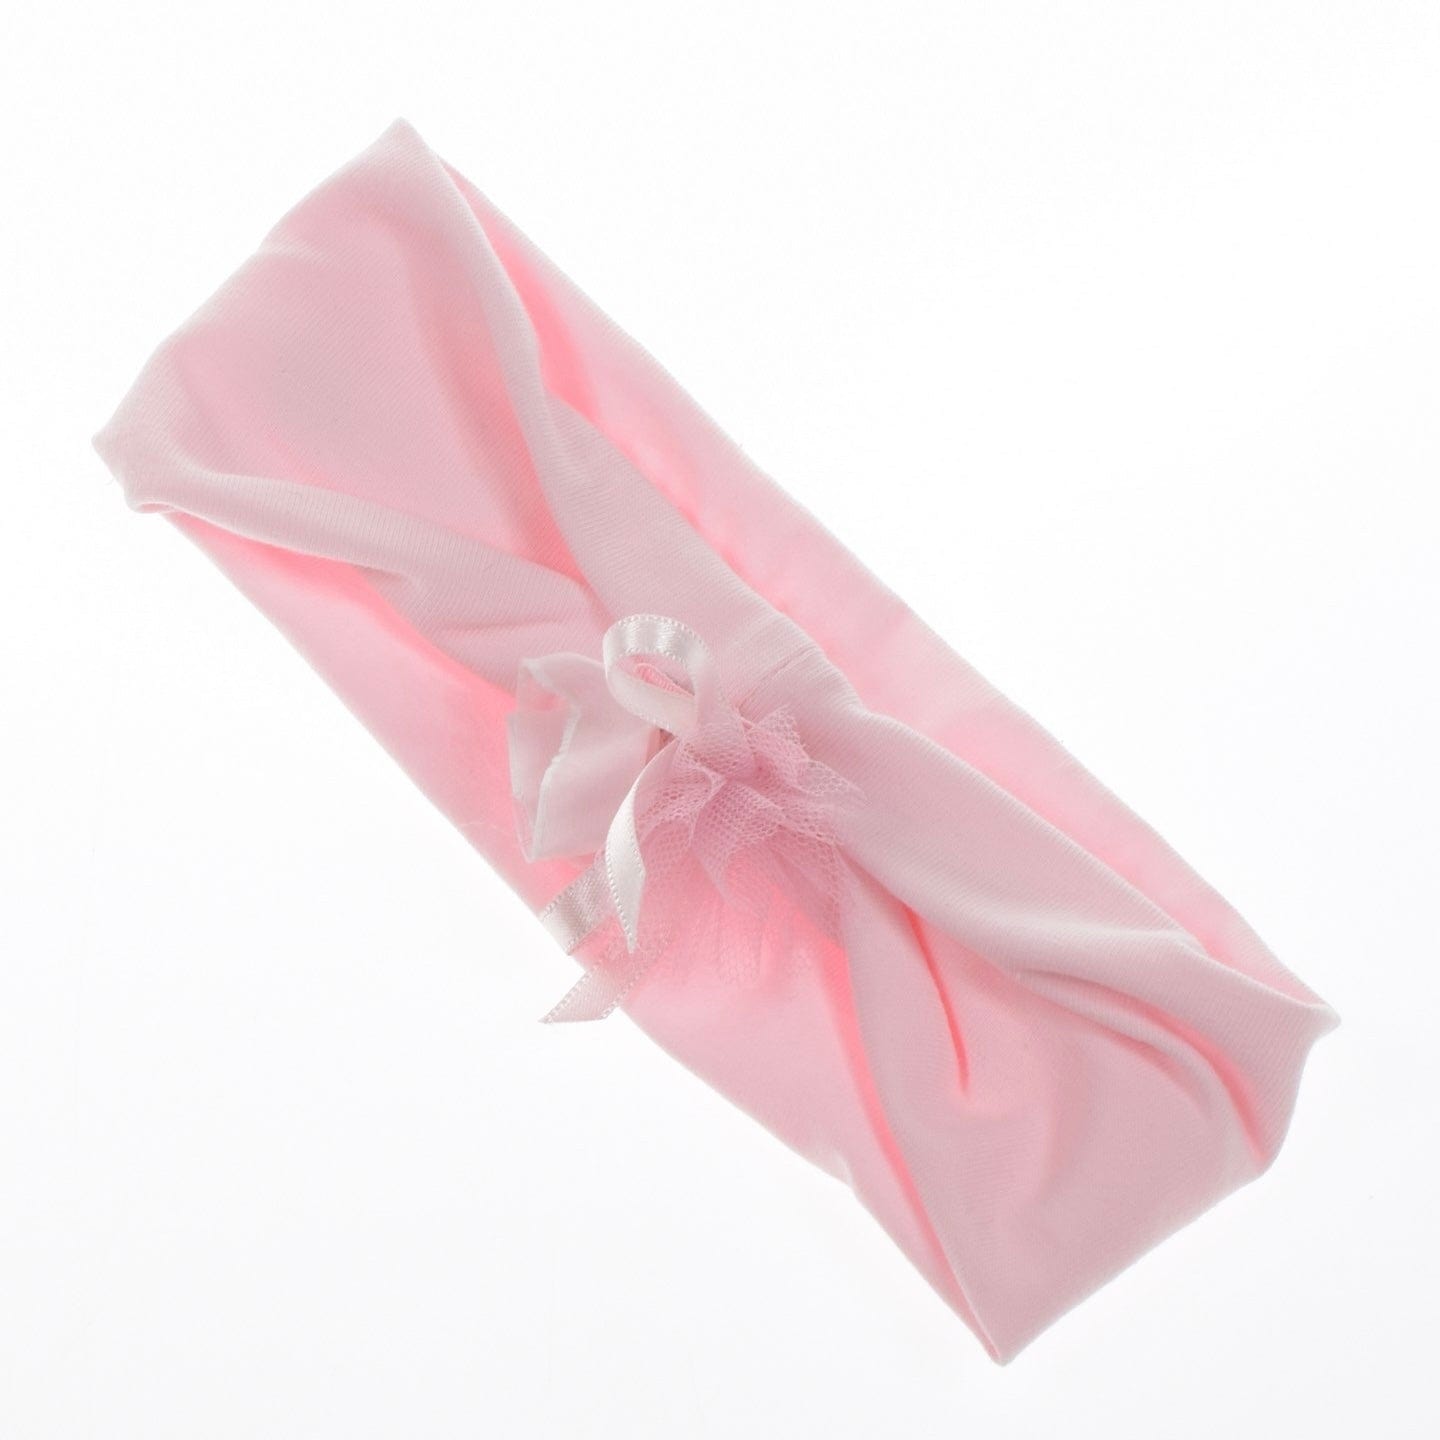 BARCELLINO - Hairband - Pink